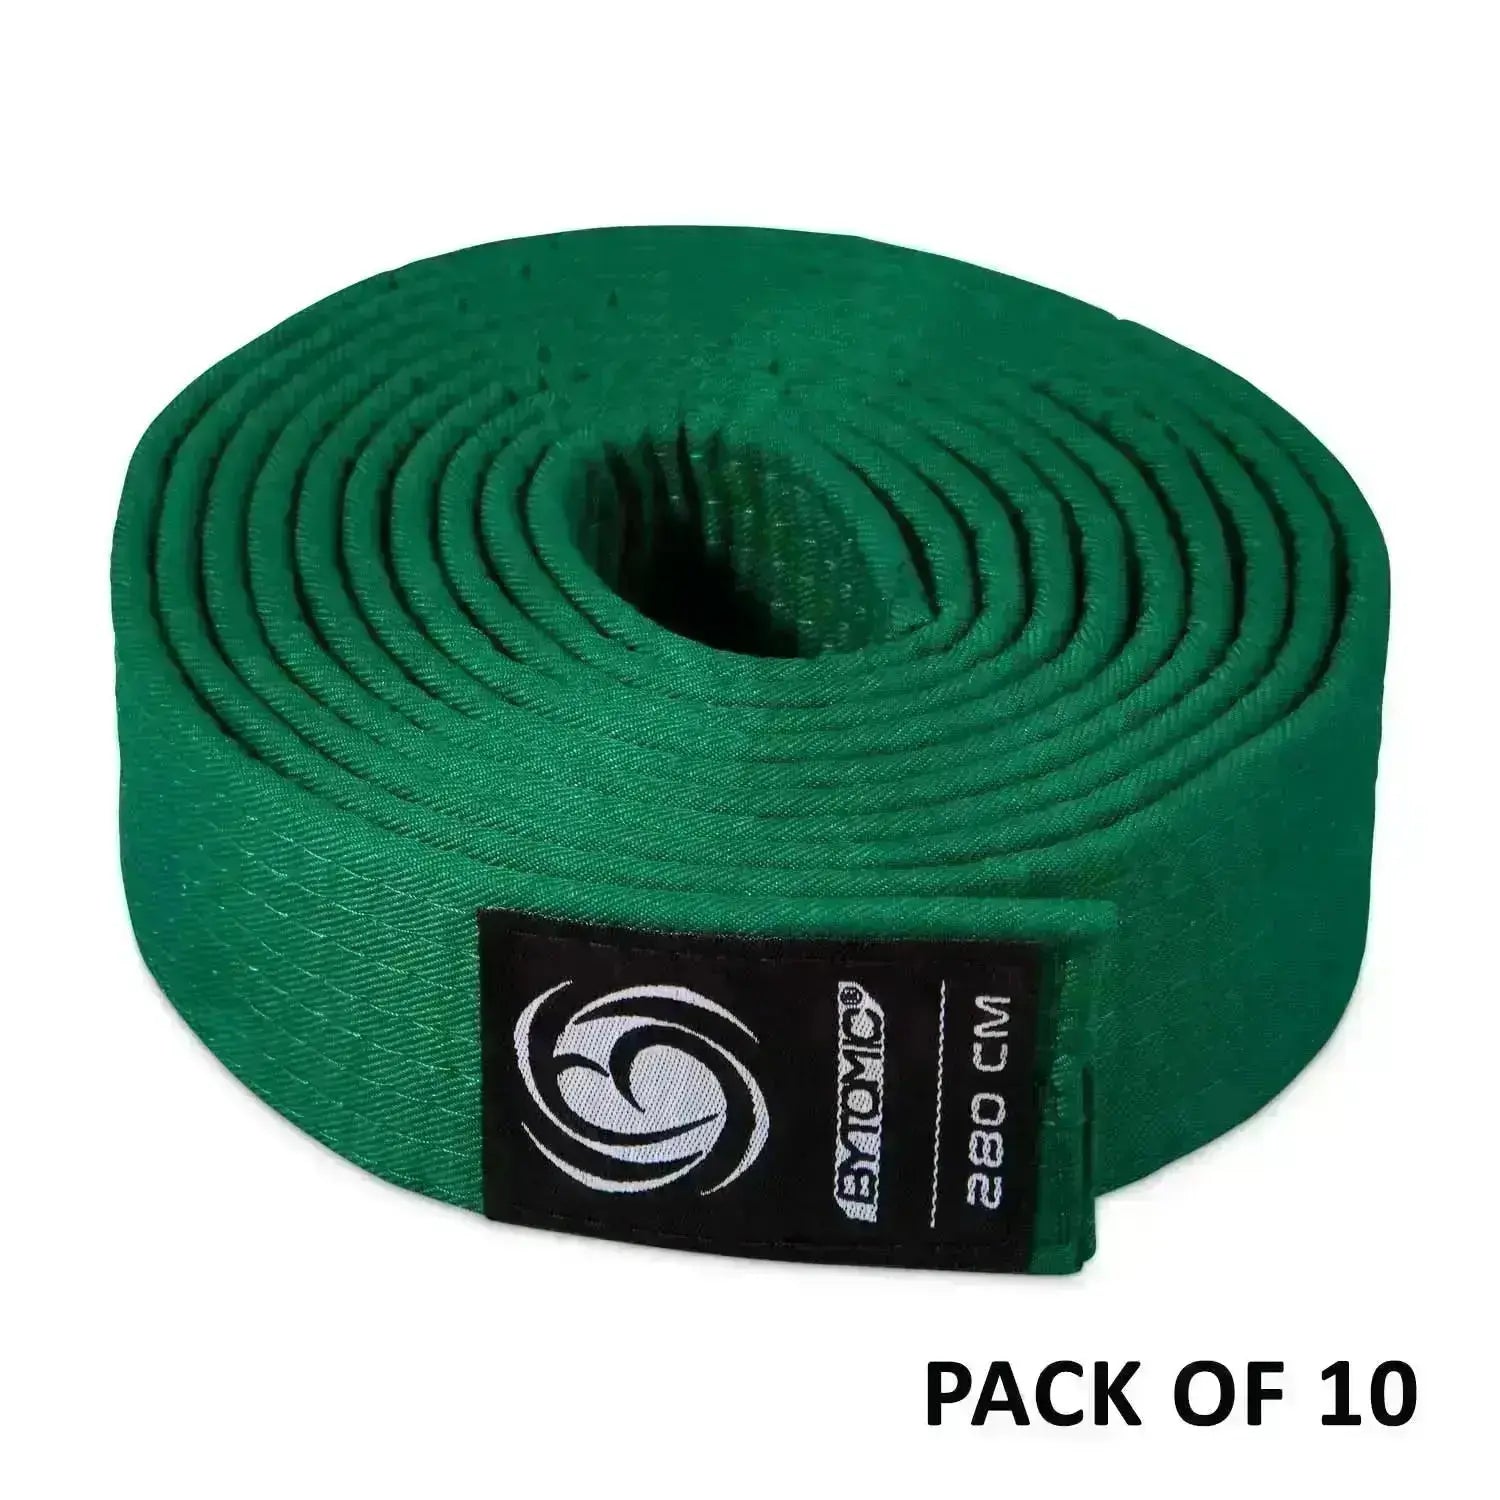 Bytomic Plain Polycotton Martial Arts Belt Pack of 10 Green-280cm Fight Co